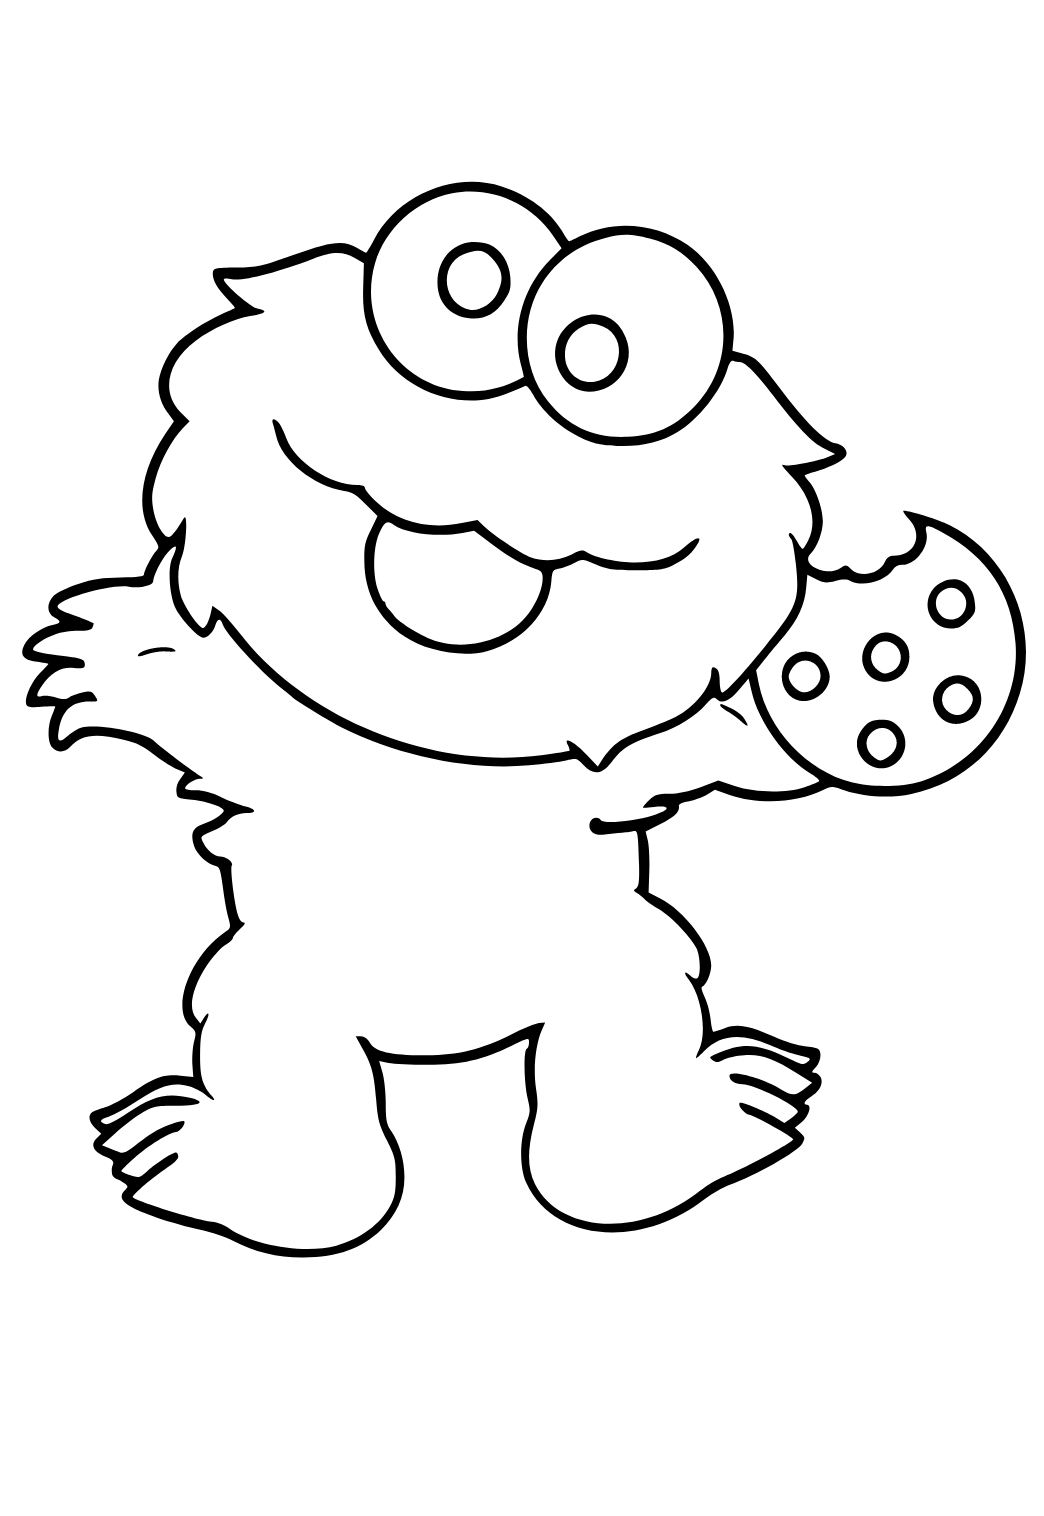 Free printable cookie monster easy coloring page for adults and kids